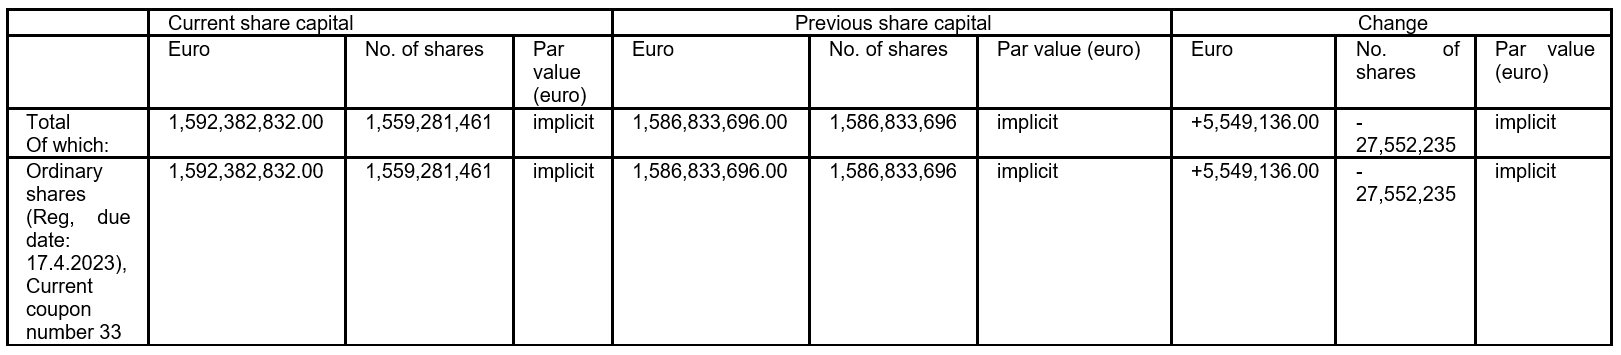 Modification of the Share capital